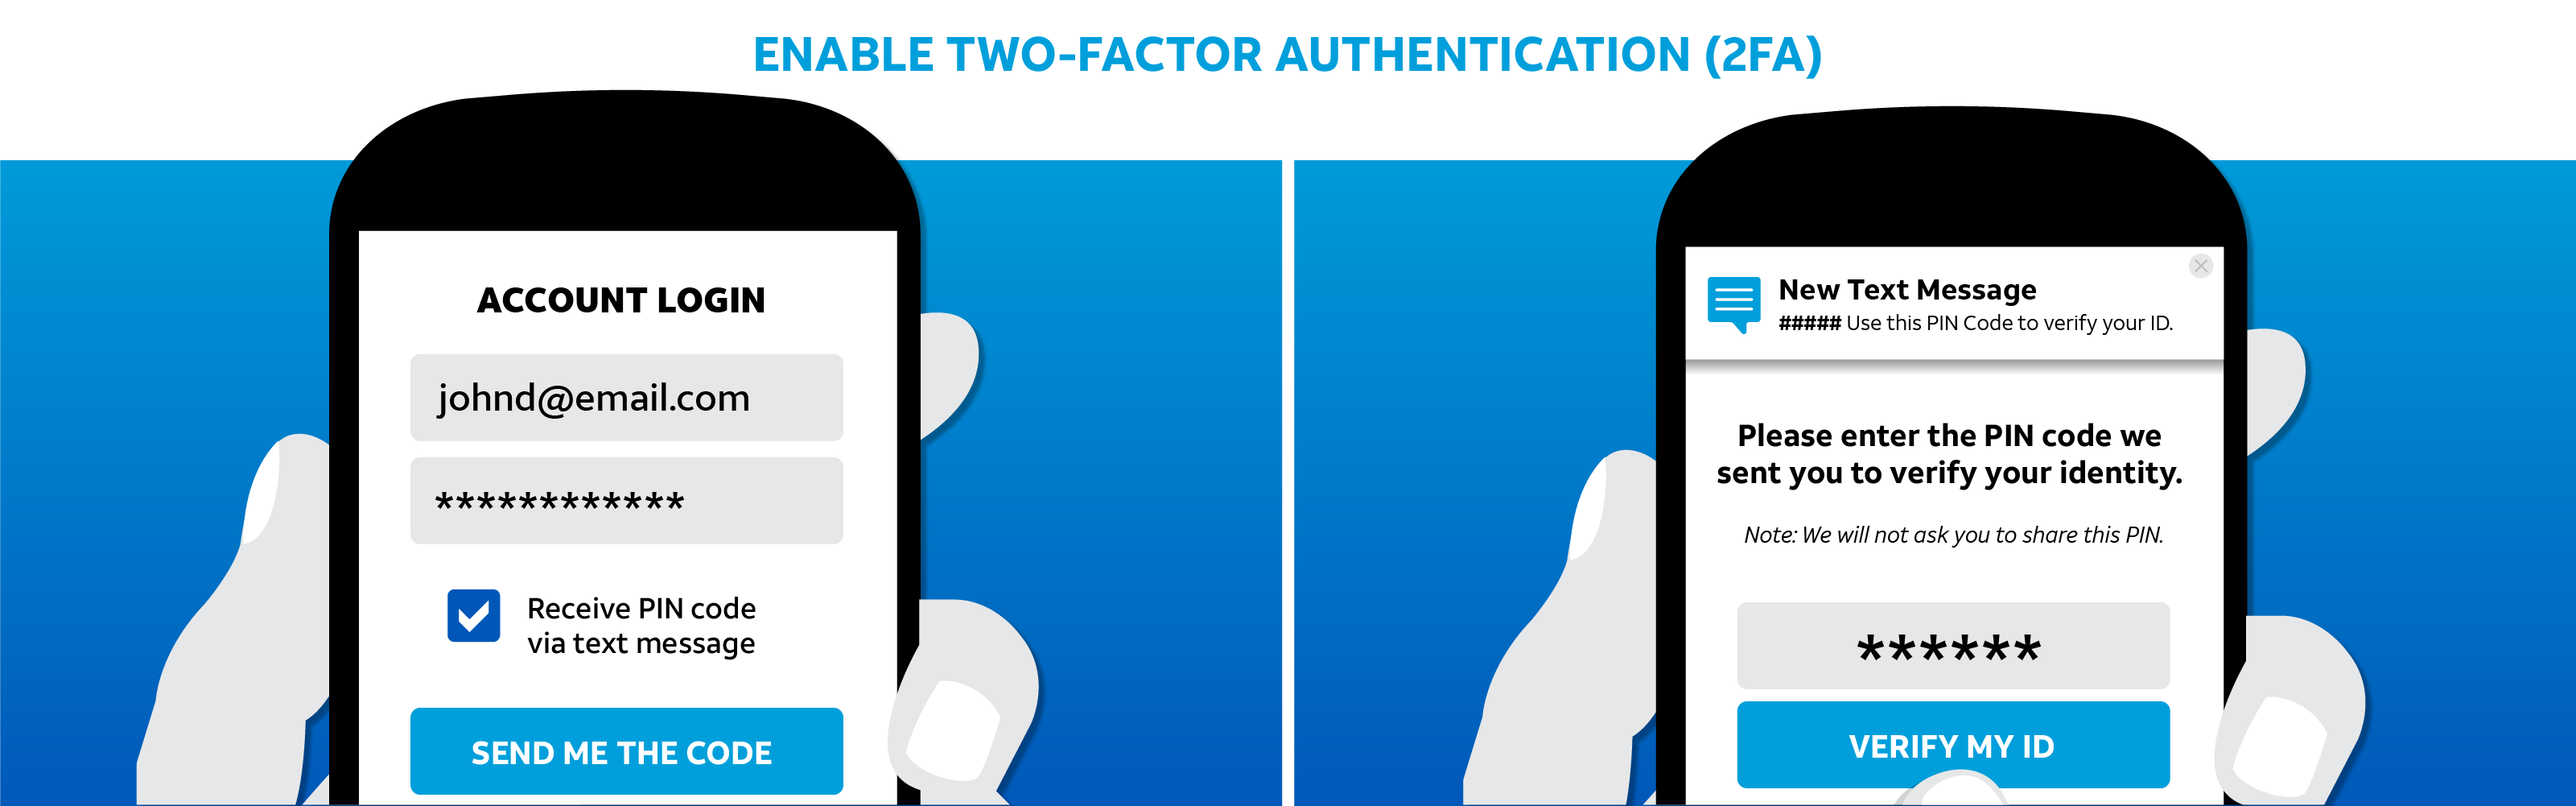 Image of two phone screens displaying how to enable two factor authentication